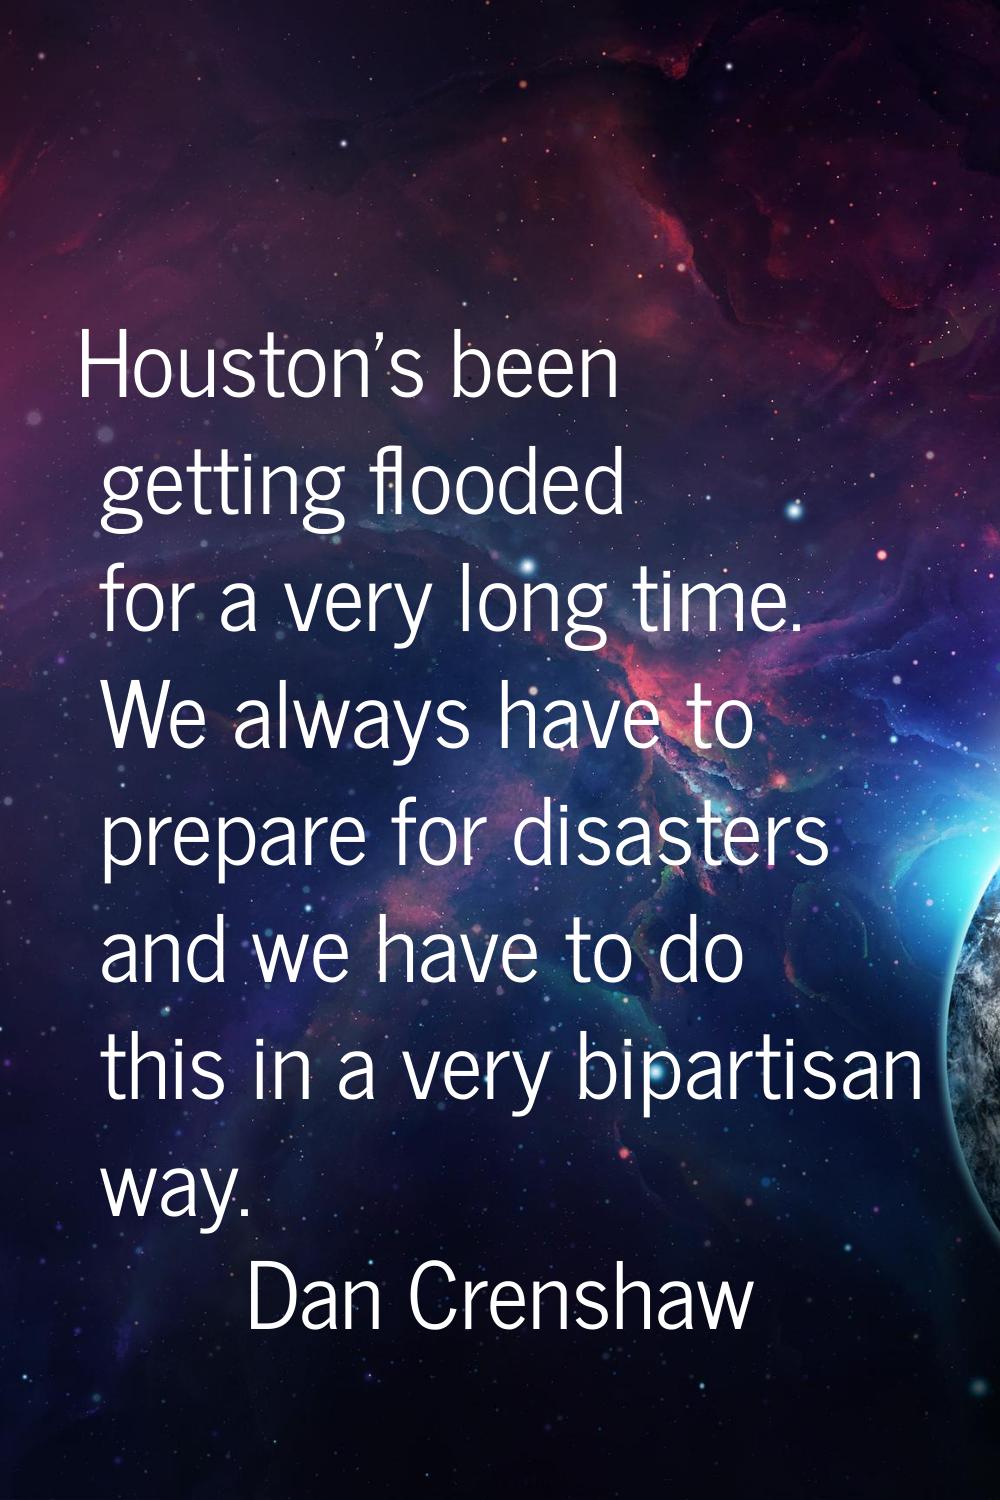 Houston's been getting flooded for a very long time. We always have to prepare for disasters and we